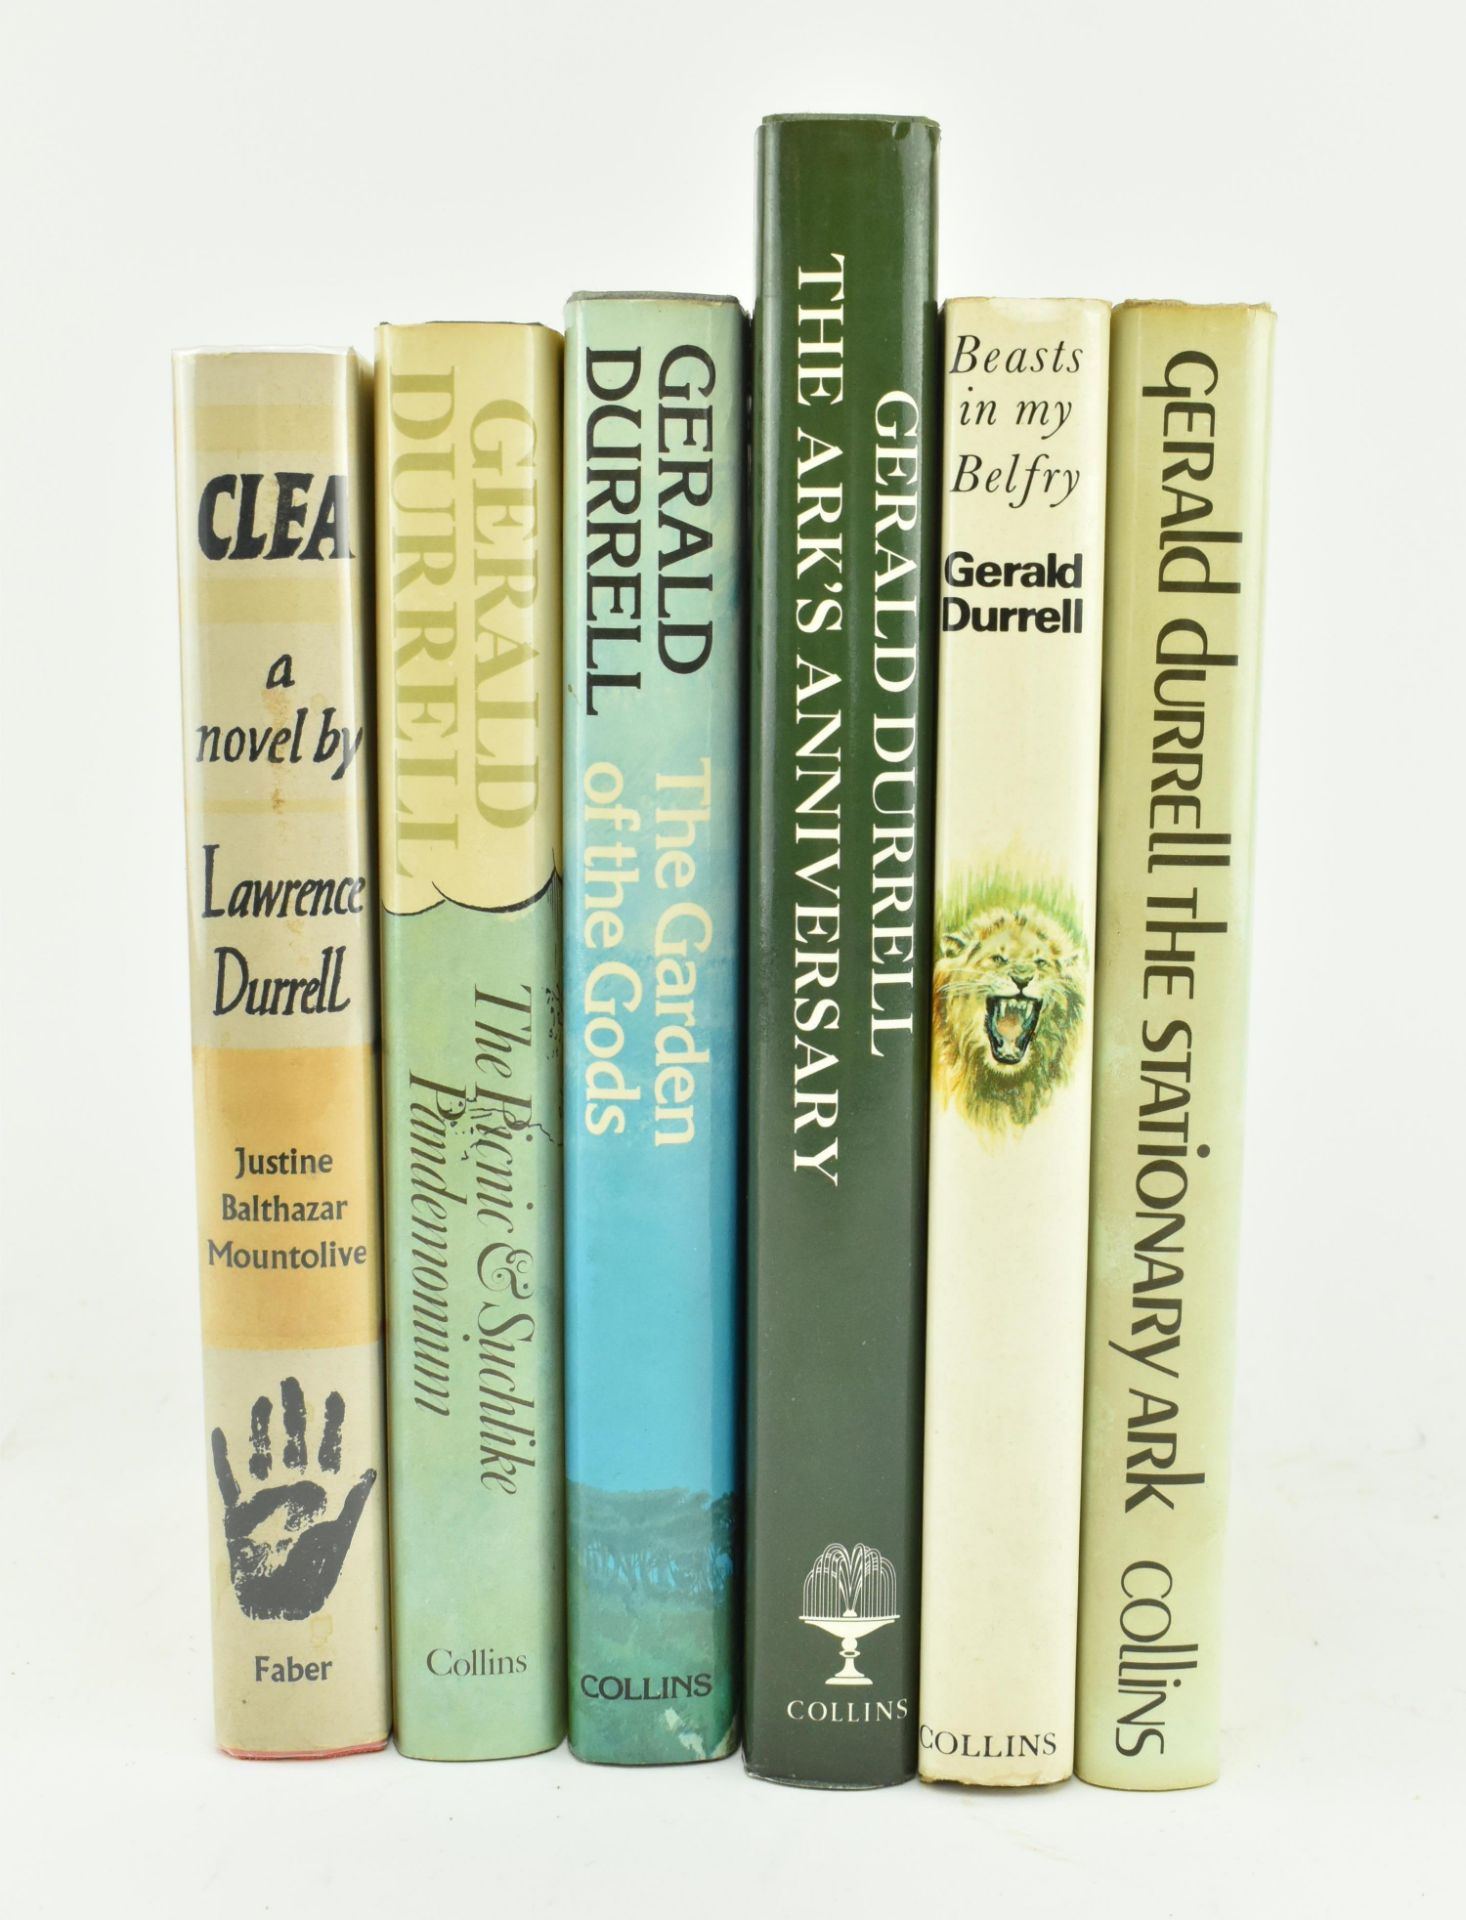 DURRELL, GERALD. SIX MODERN FIRST EDITIONS IN DUST WRAPPERS